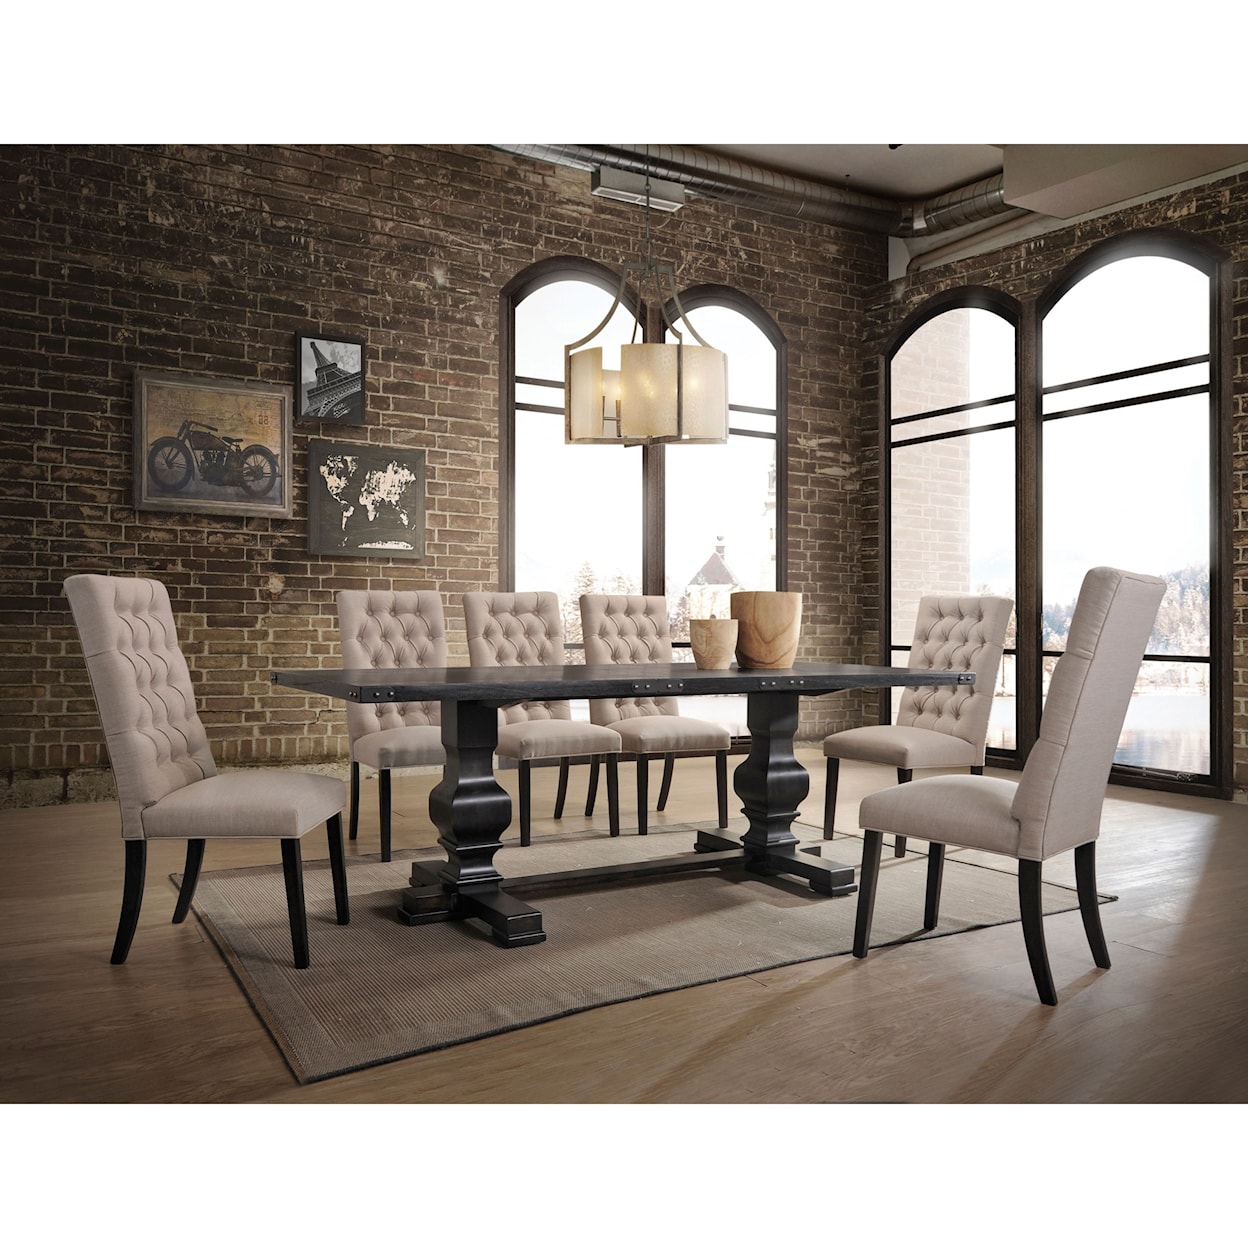 Acme Furniture Morland Dining Table Set with 6 Chairs